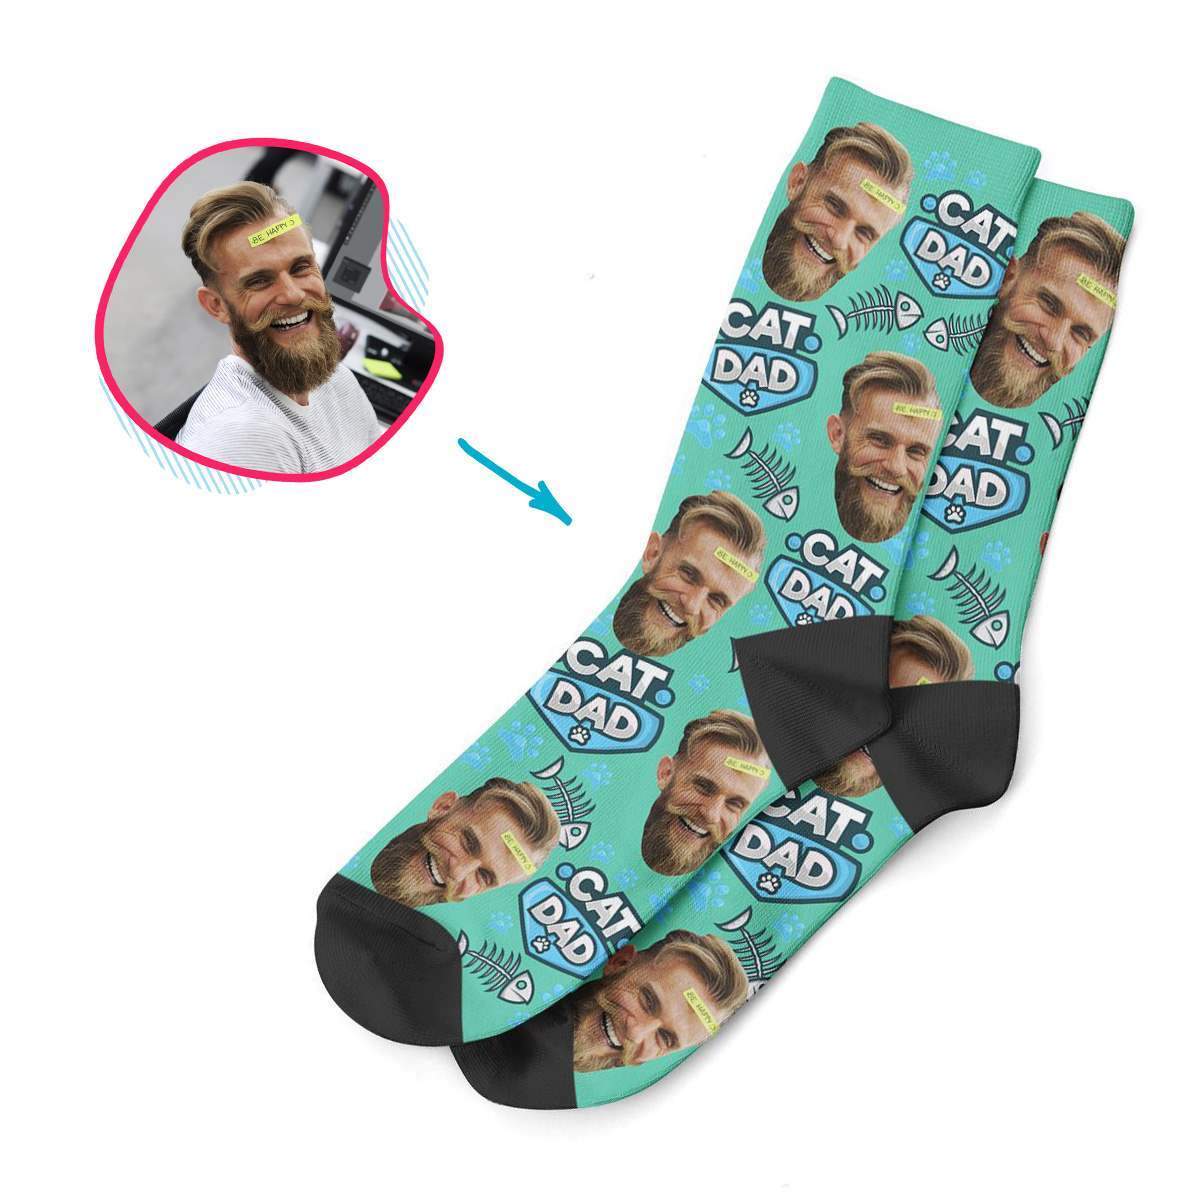 mint Cat Dad socks personalized with photo of face printed on them